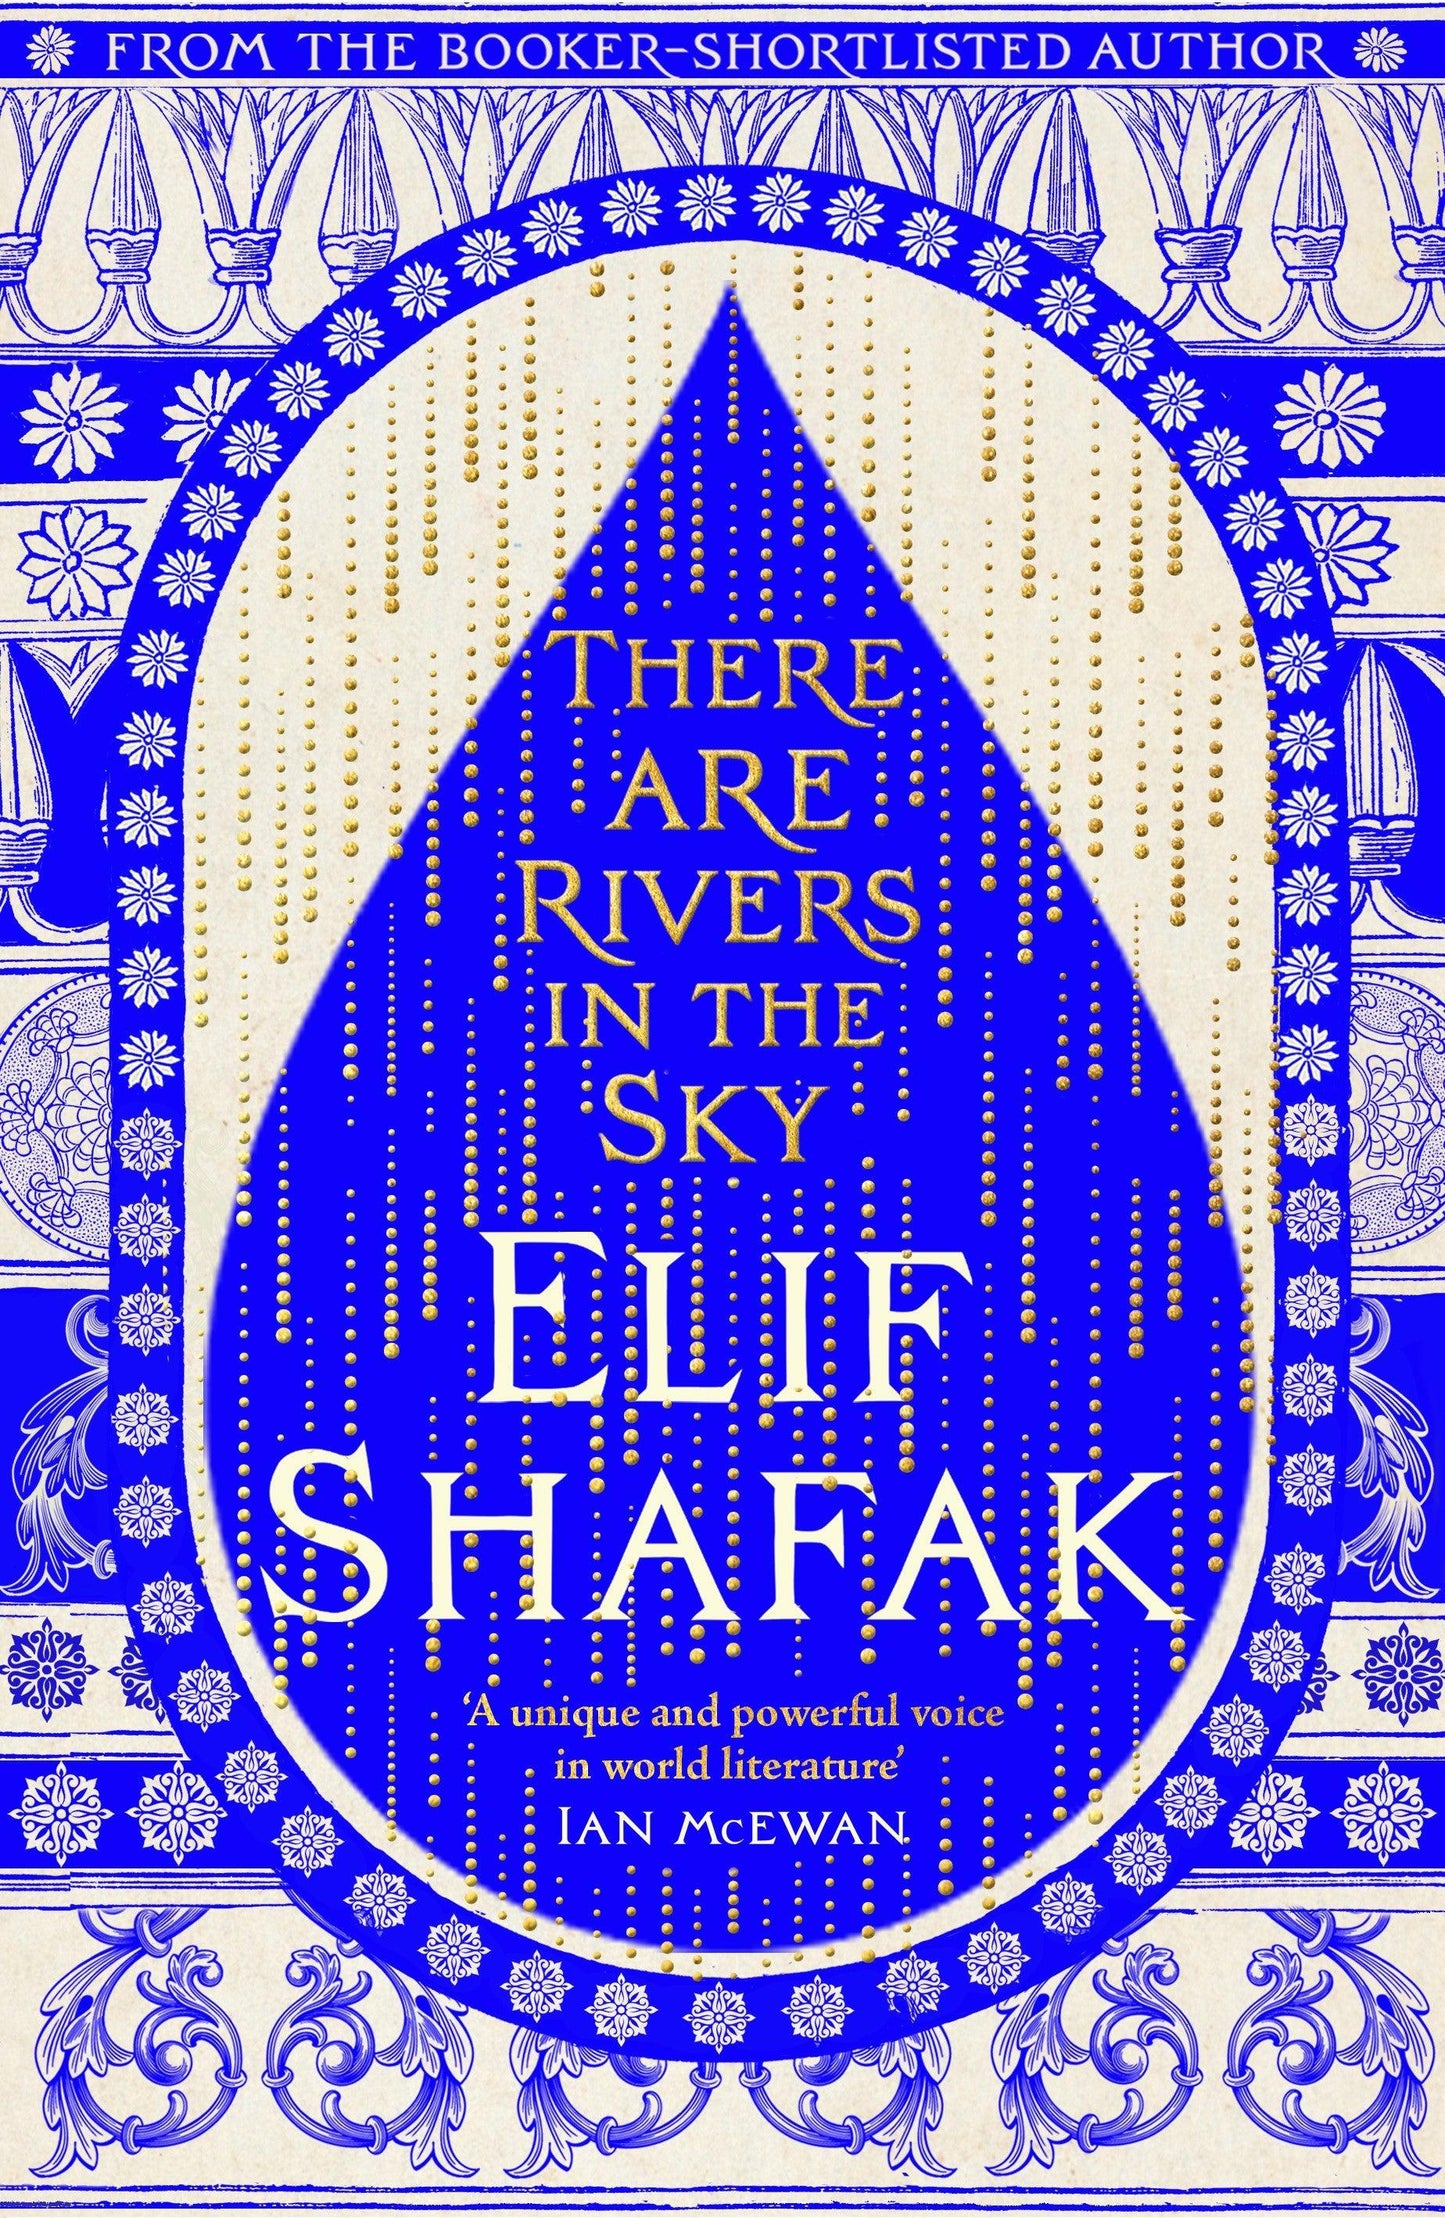 'There Are Rivers In The Sky' by Elif Shafak - Signed & Exclusive Edition - Pub. August 8th - The Cleeve Bookshop